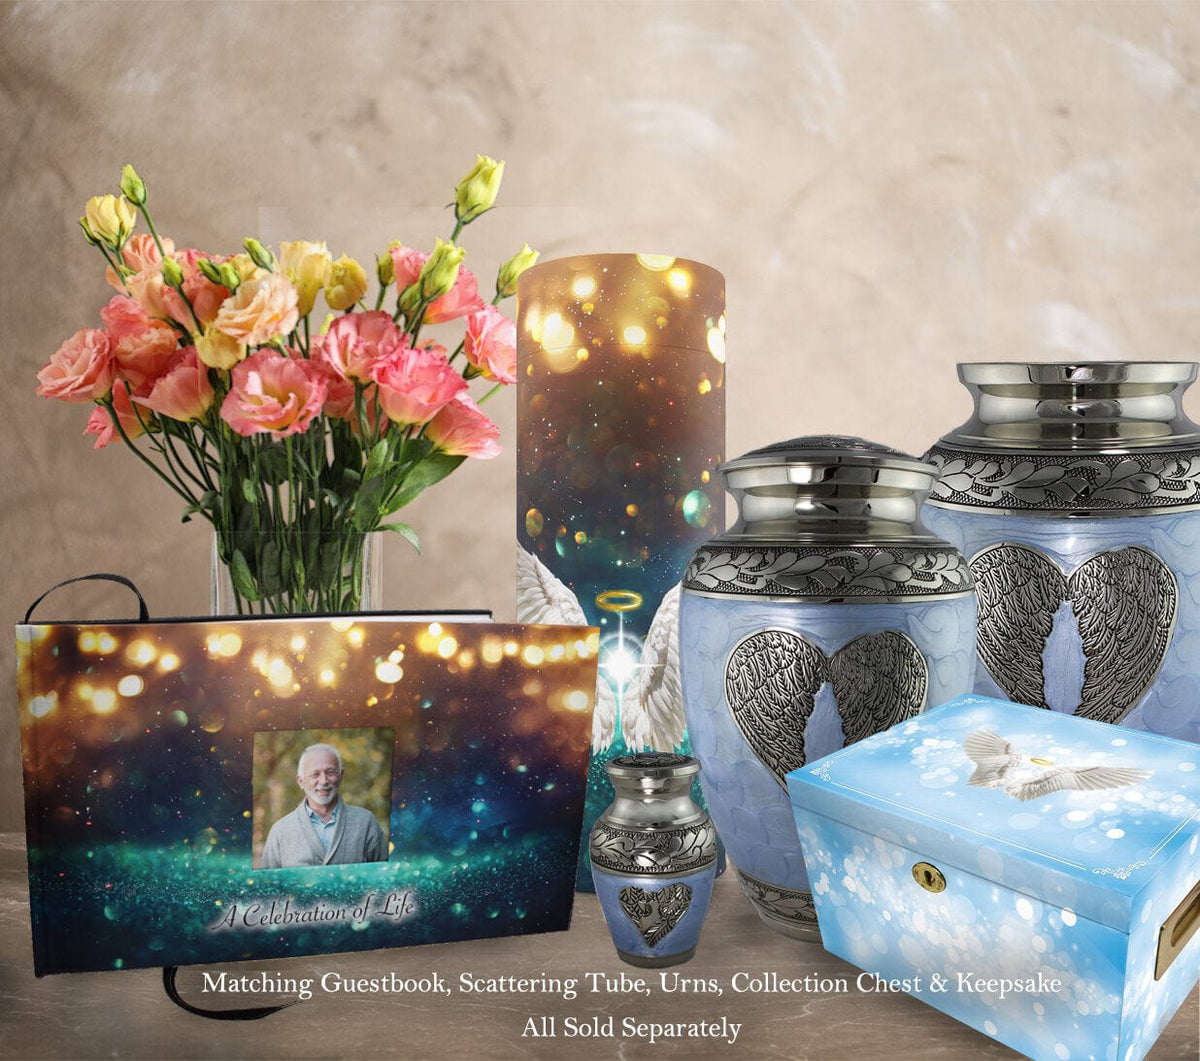 Commemorative Cremation Urns Home &amp; Garden Baby Blue Loving Angel Wings Cremation Urn